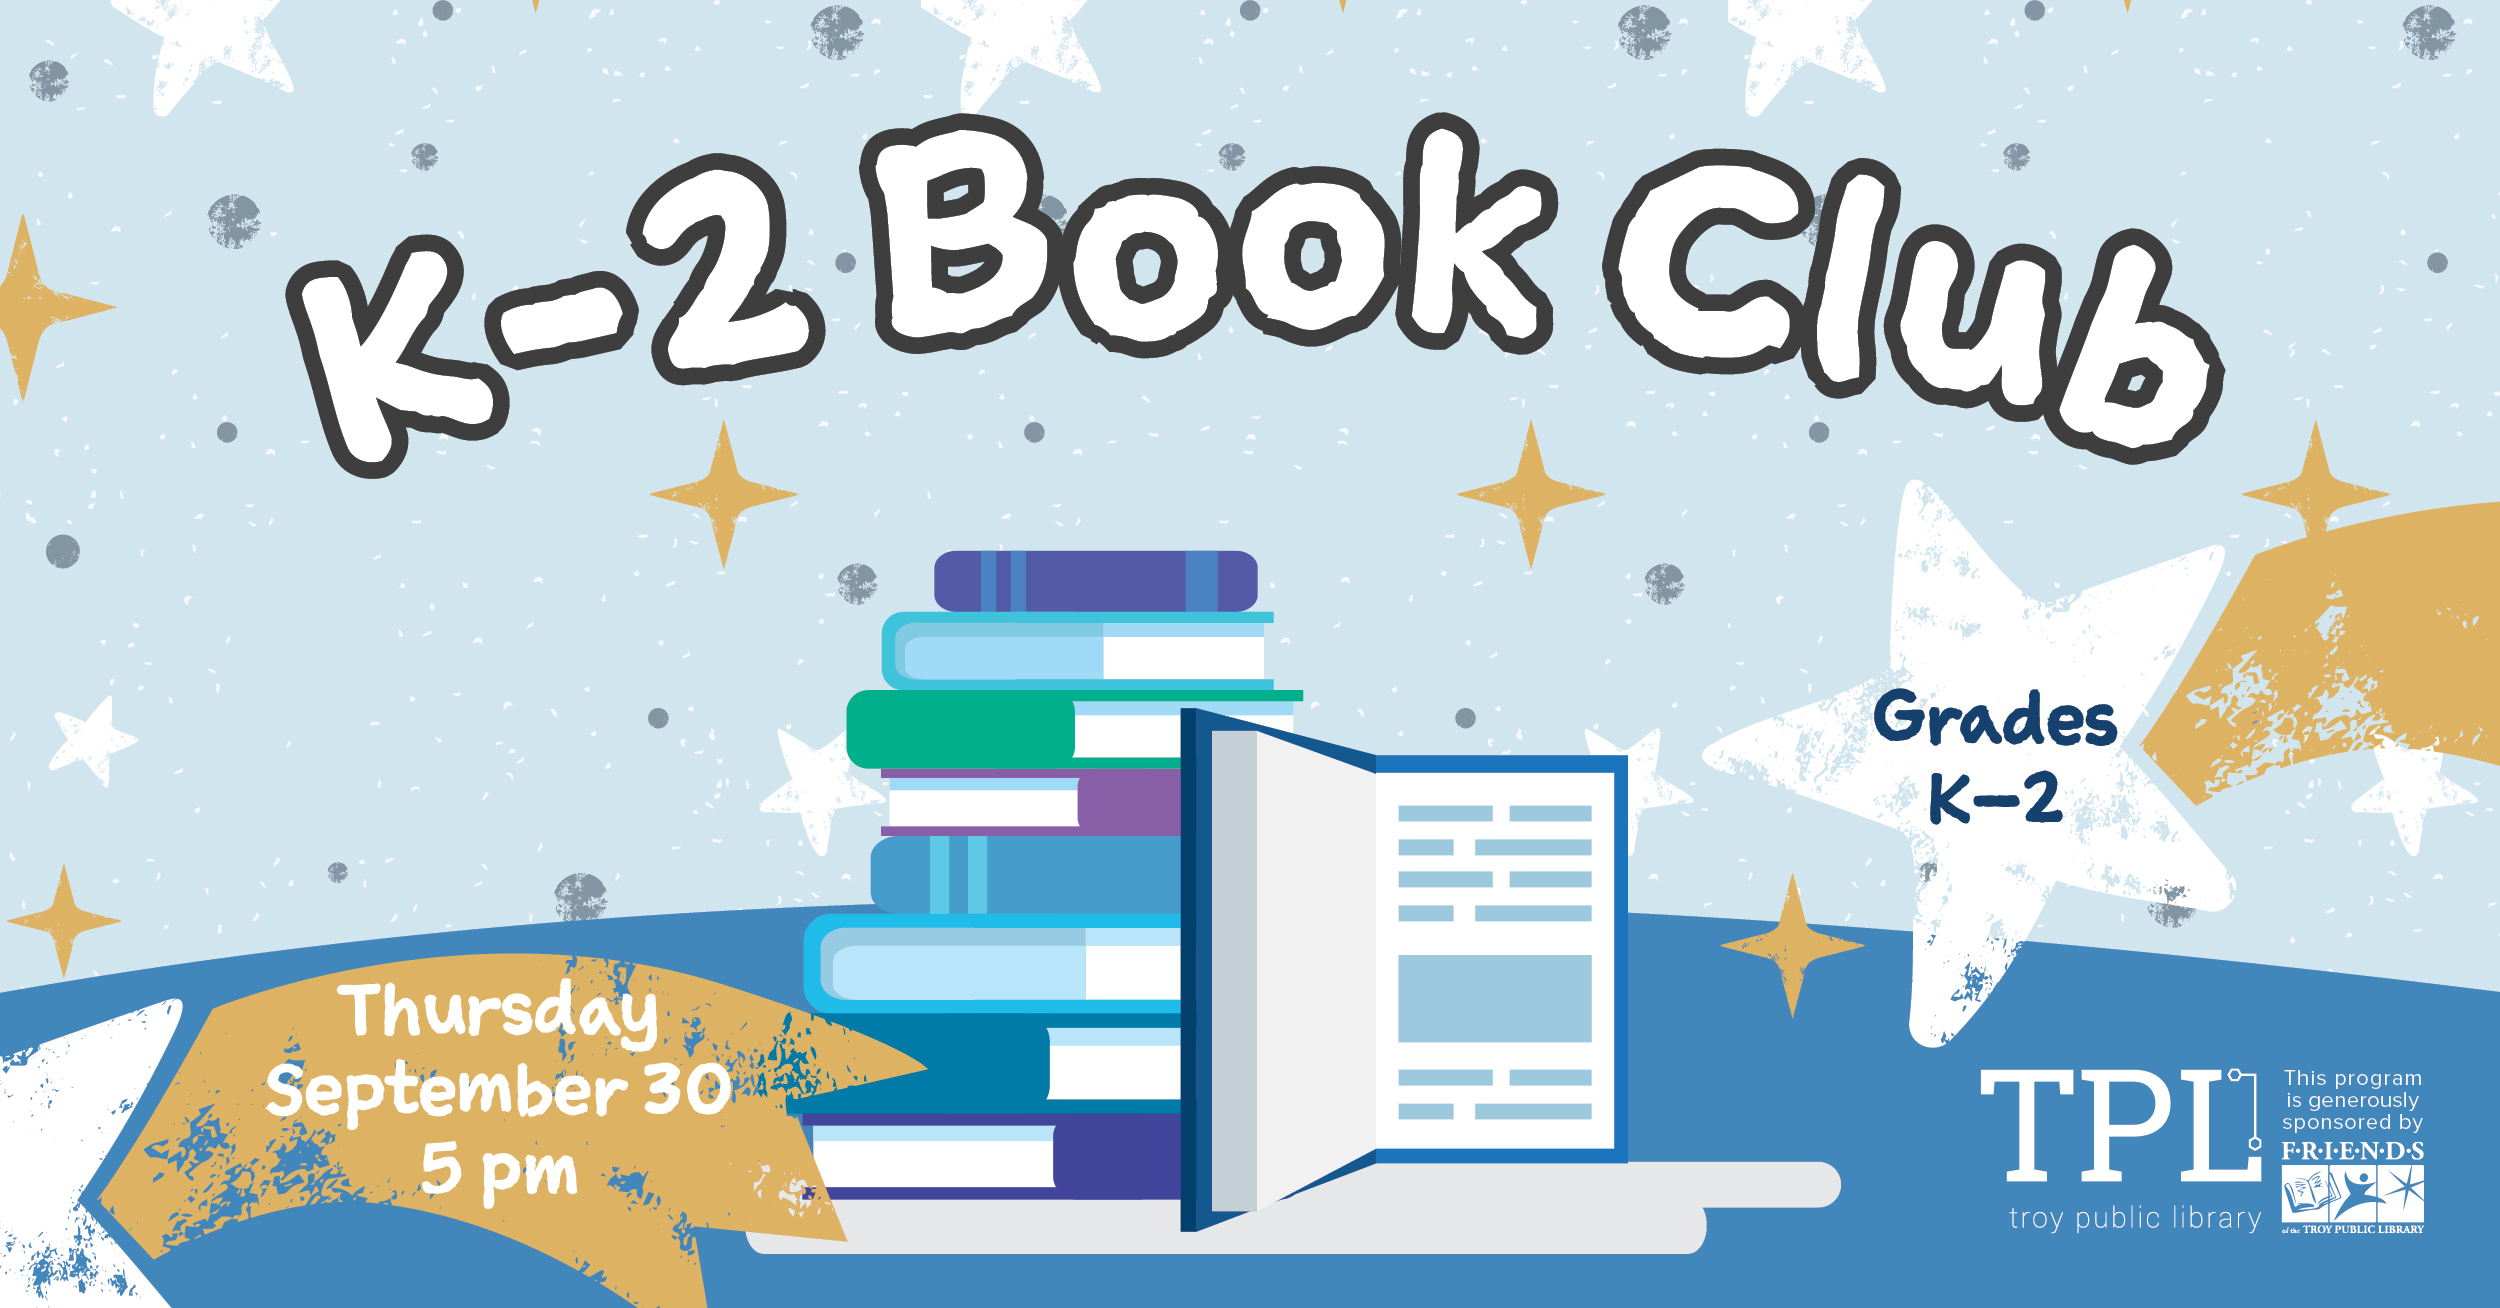 K-2 Book Club For grades k to 2. Thursday, September 30 at 5pm. Sponsored by the Friends of the Troy Public Library